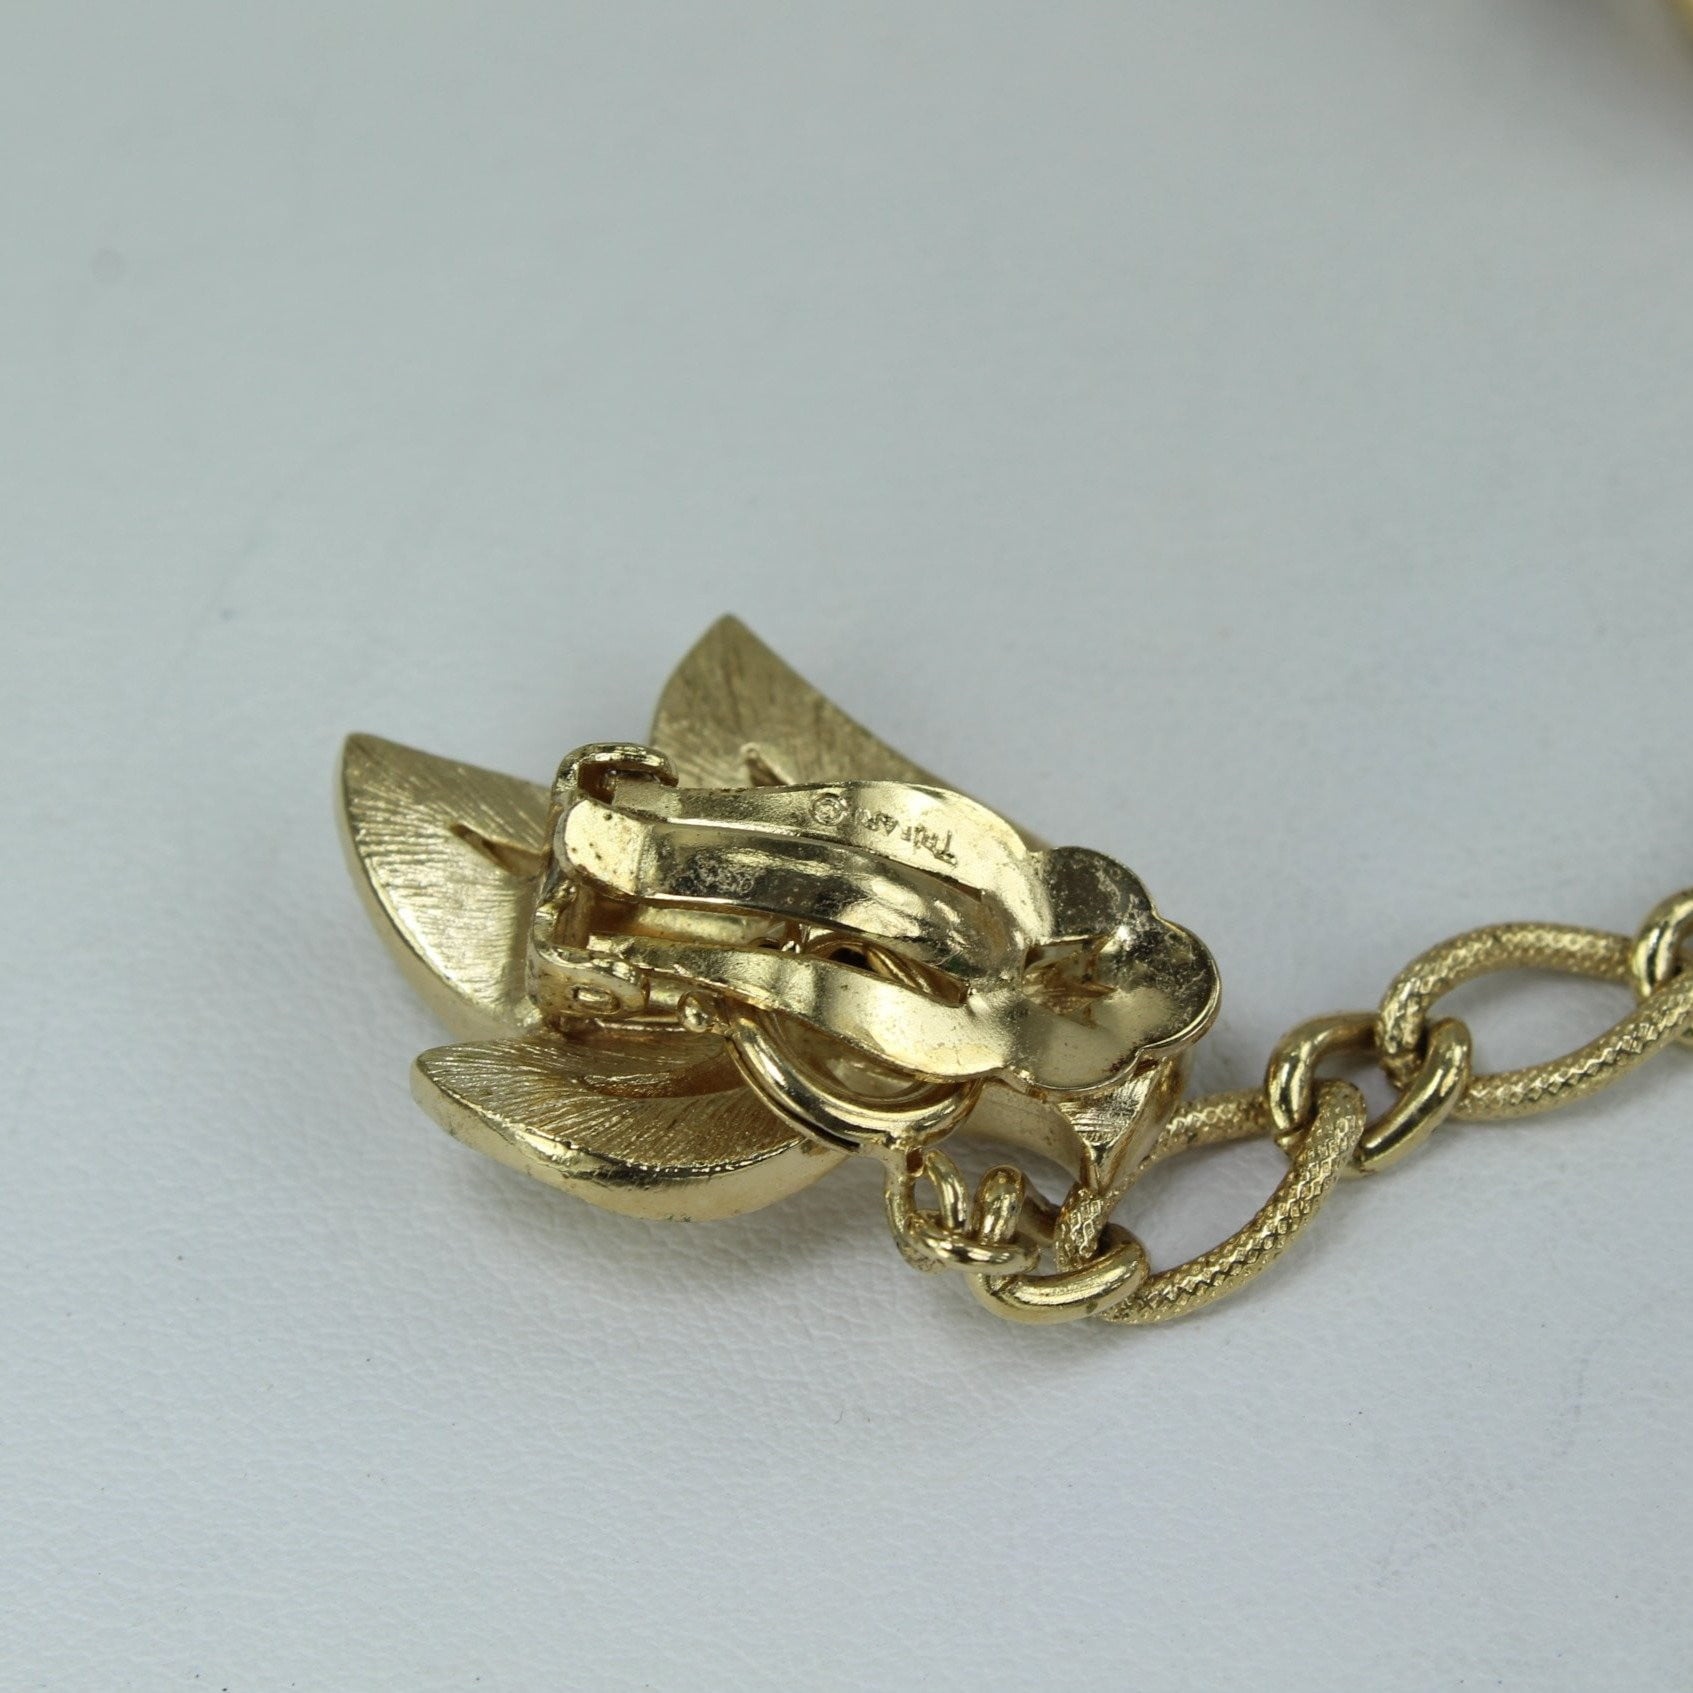 Vintage CROWN TRIFARI Sweater Guard Coat Clip Gold Leaves collectible